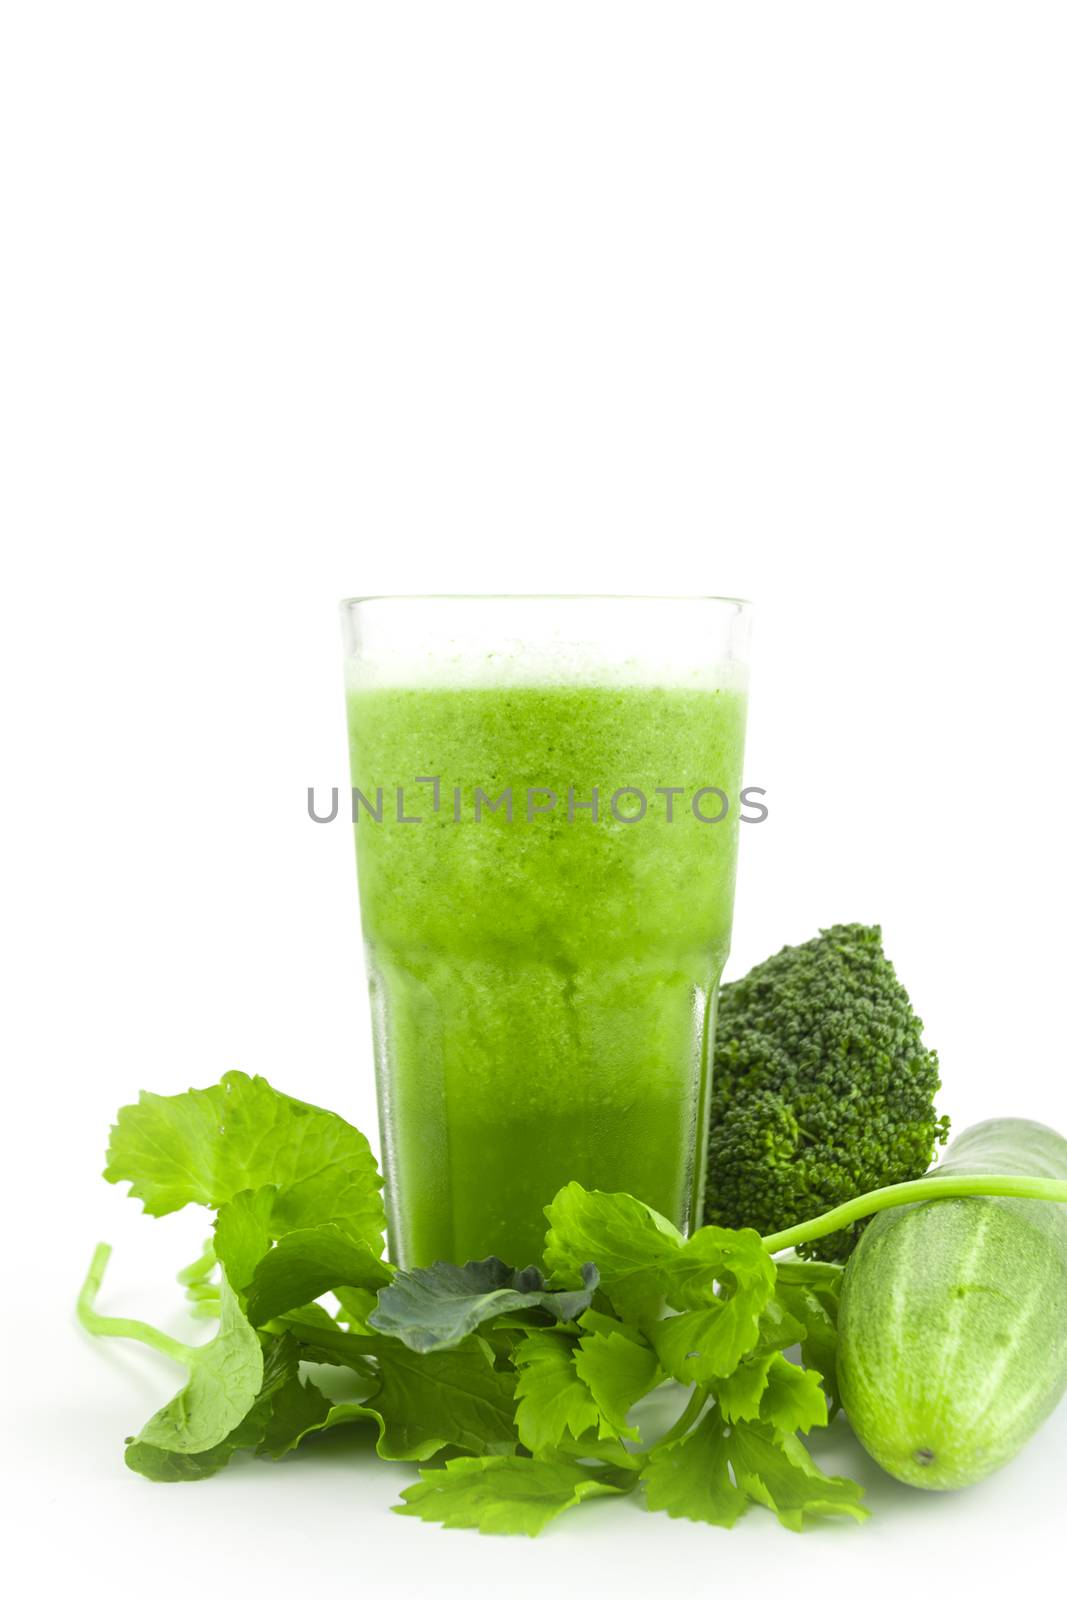 Healthy green smoothie  by wyoosumran